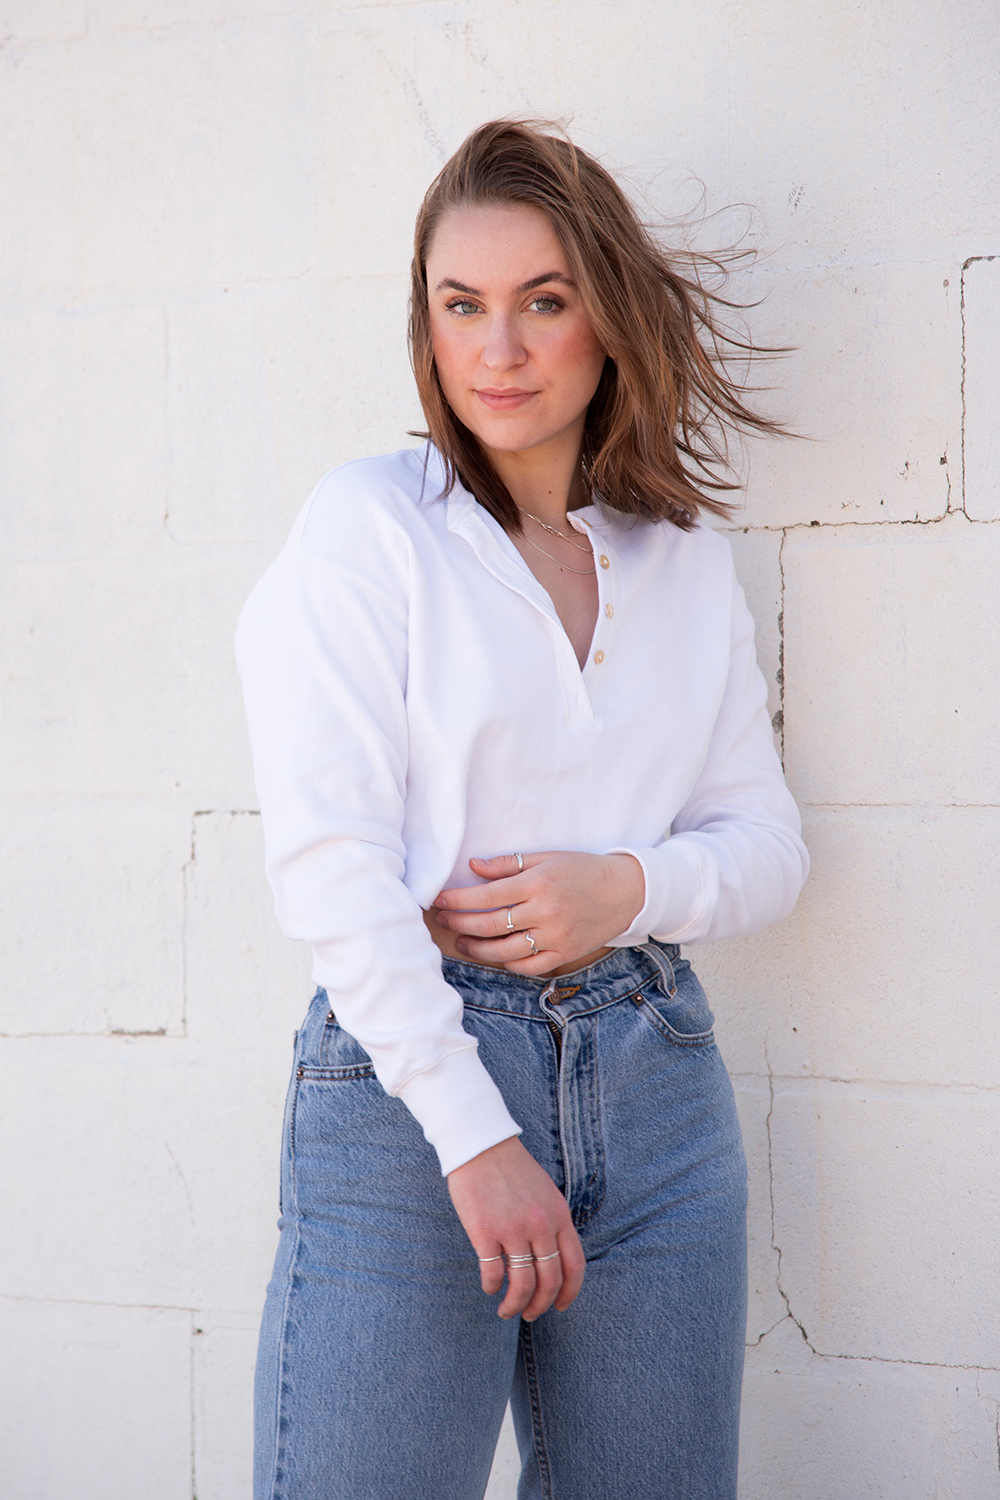 Female subject stands in front of white brick wall with blue jeans and white t-shirt for an urban style image